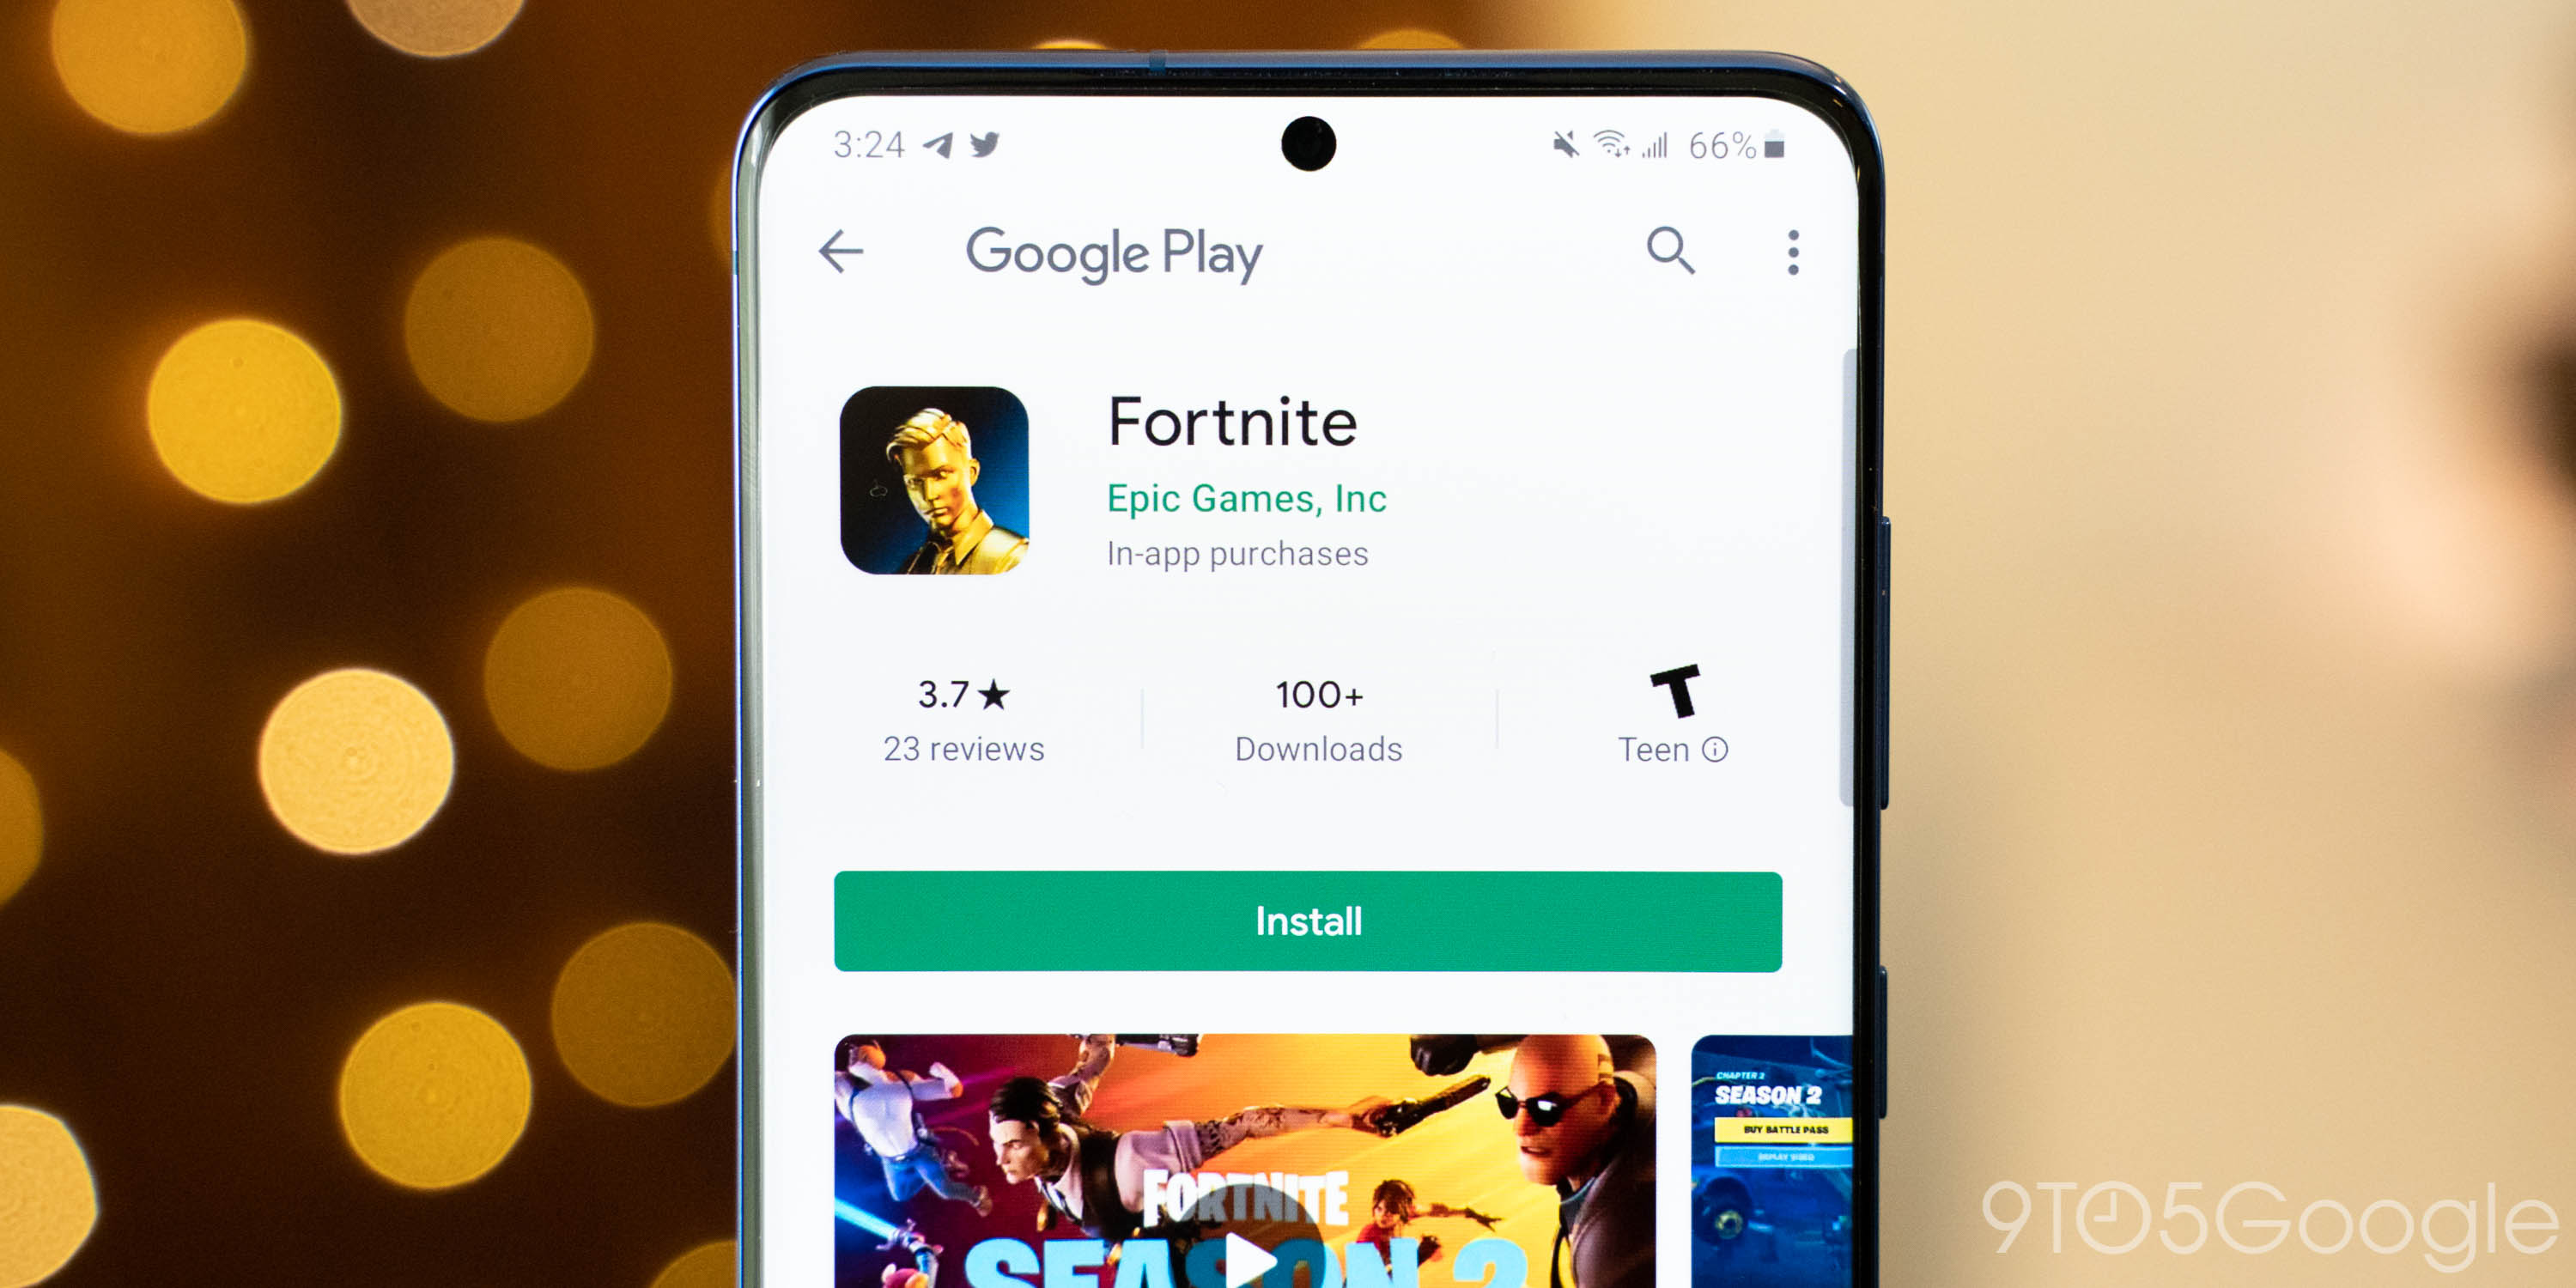 Fortnite Arrives On The Google Play Store For Android Users